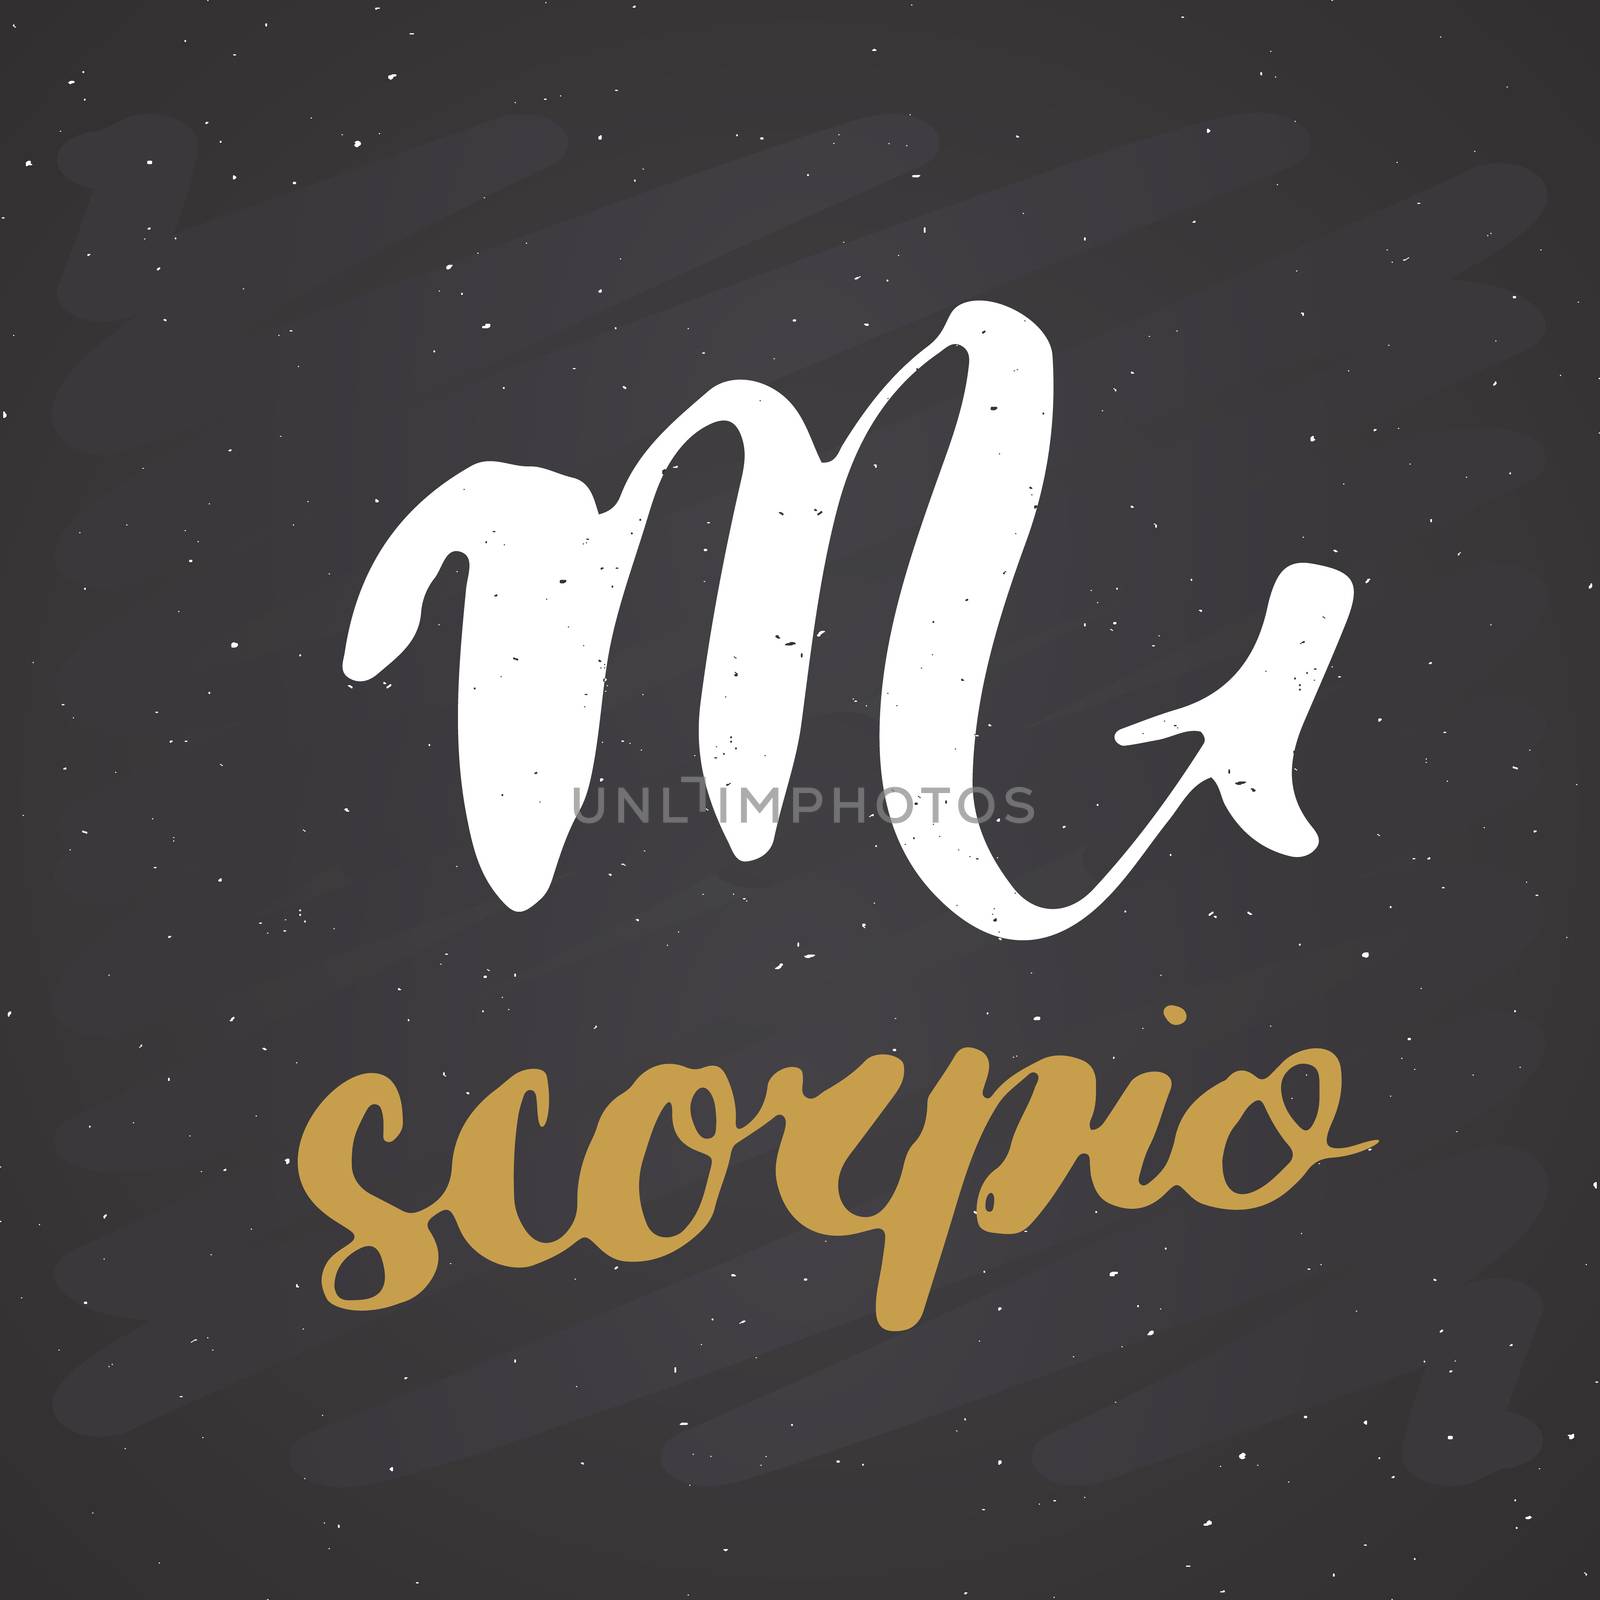 Zodiac sign Scorpio and lettering. Hand drawn horoscope astrology symbol, grunge textured design, typography print, vector illustration on chalkboard background.